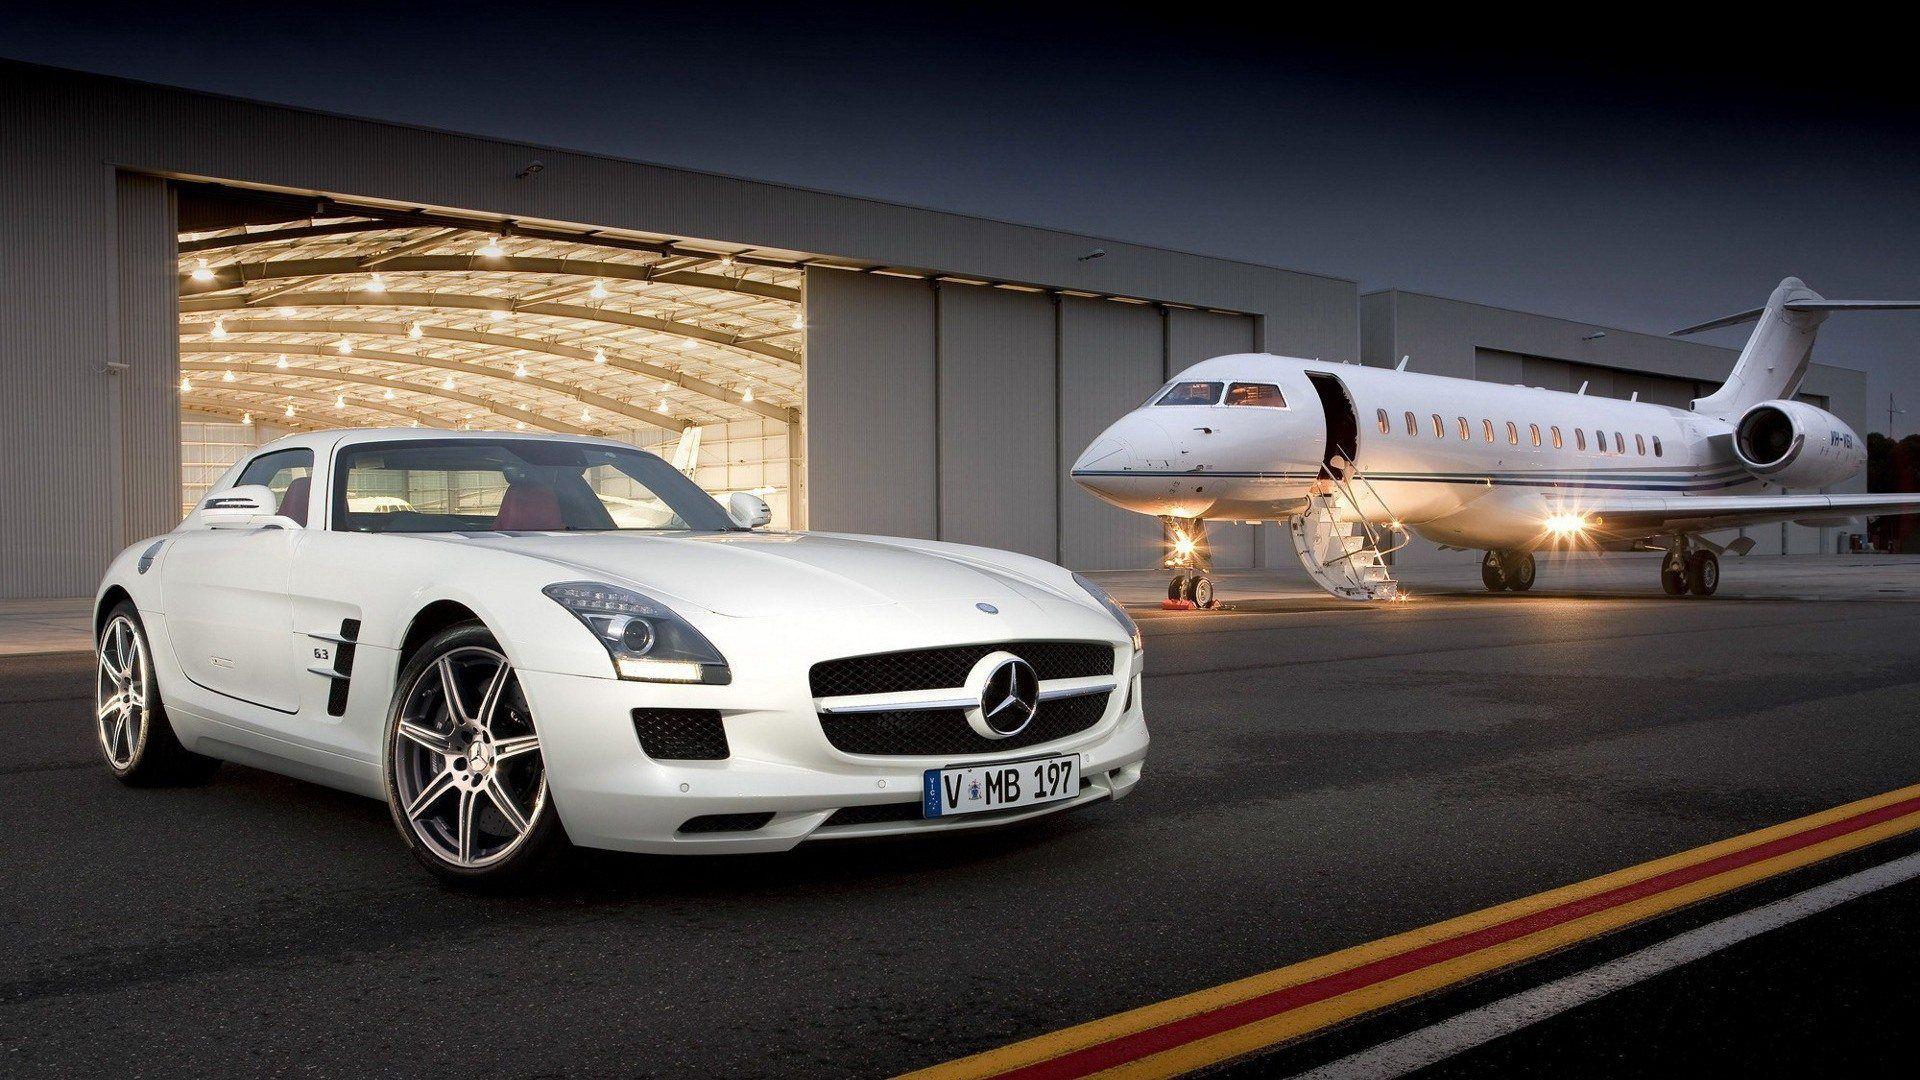 Luxury Car and Jet Wallpaper 49822 1920x1080px